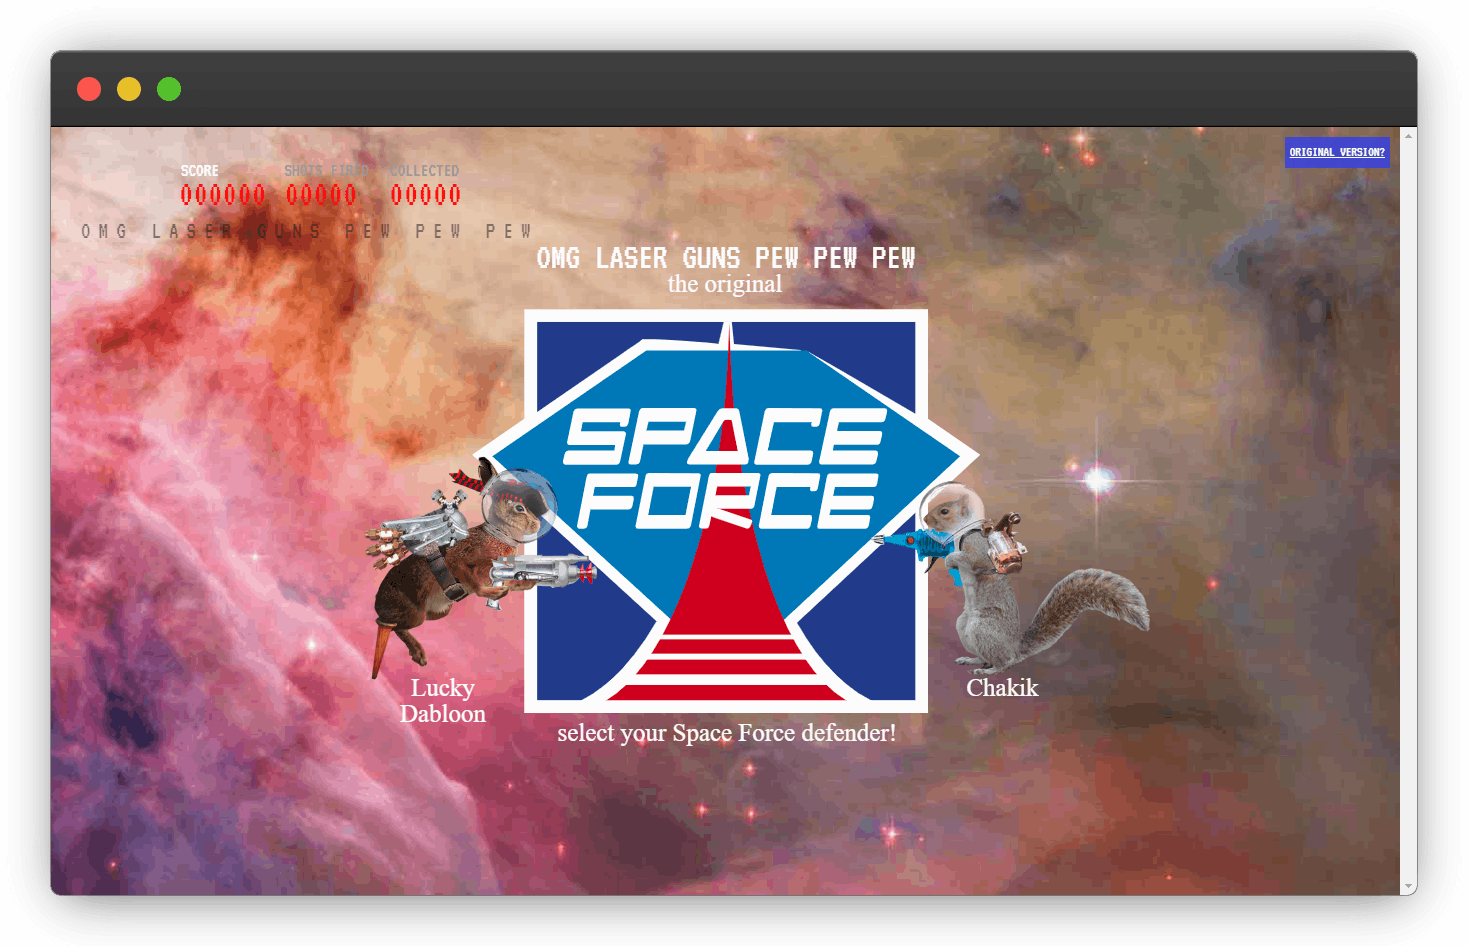 Space force landing page